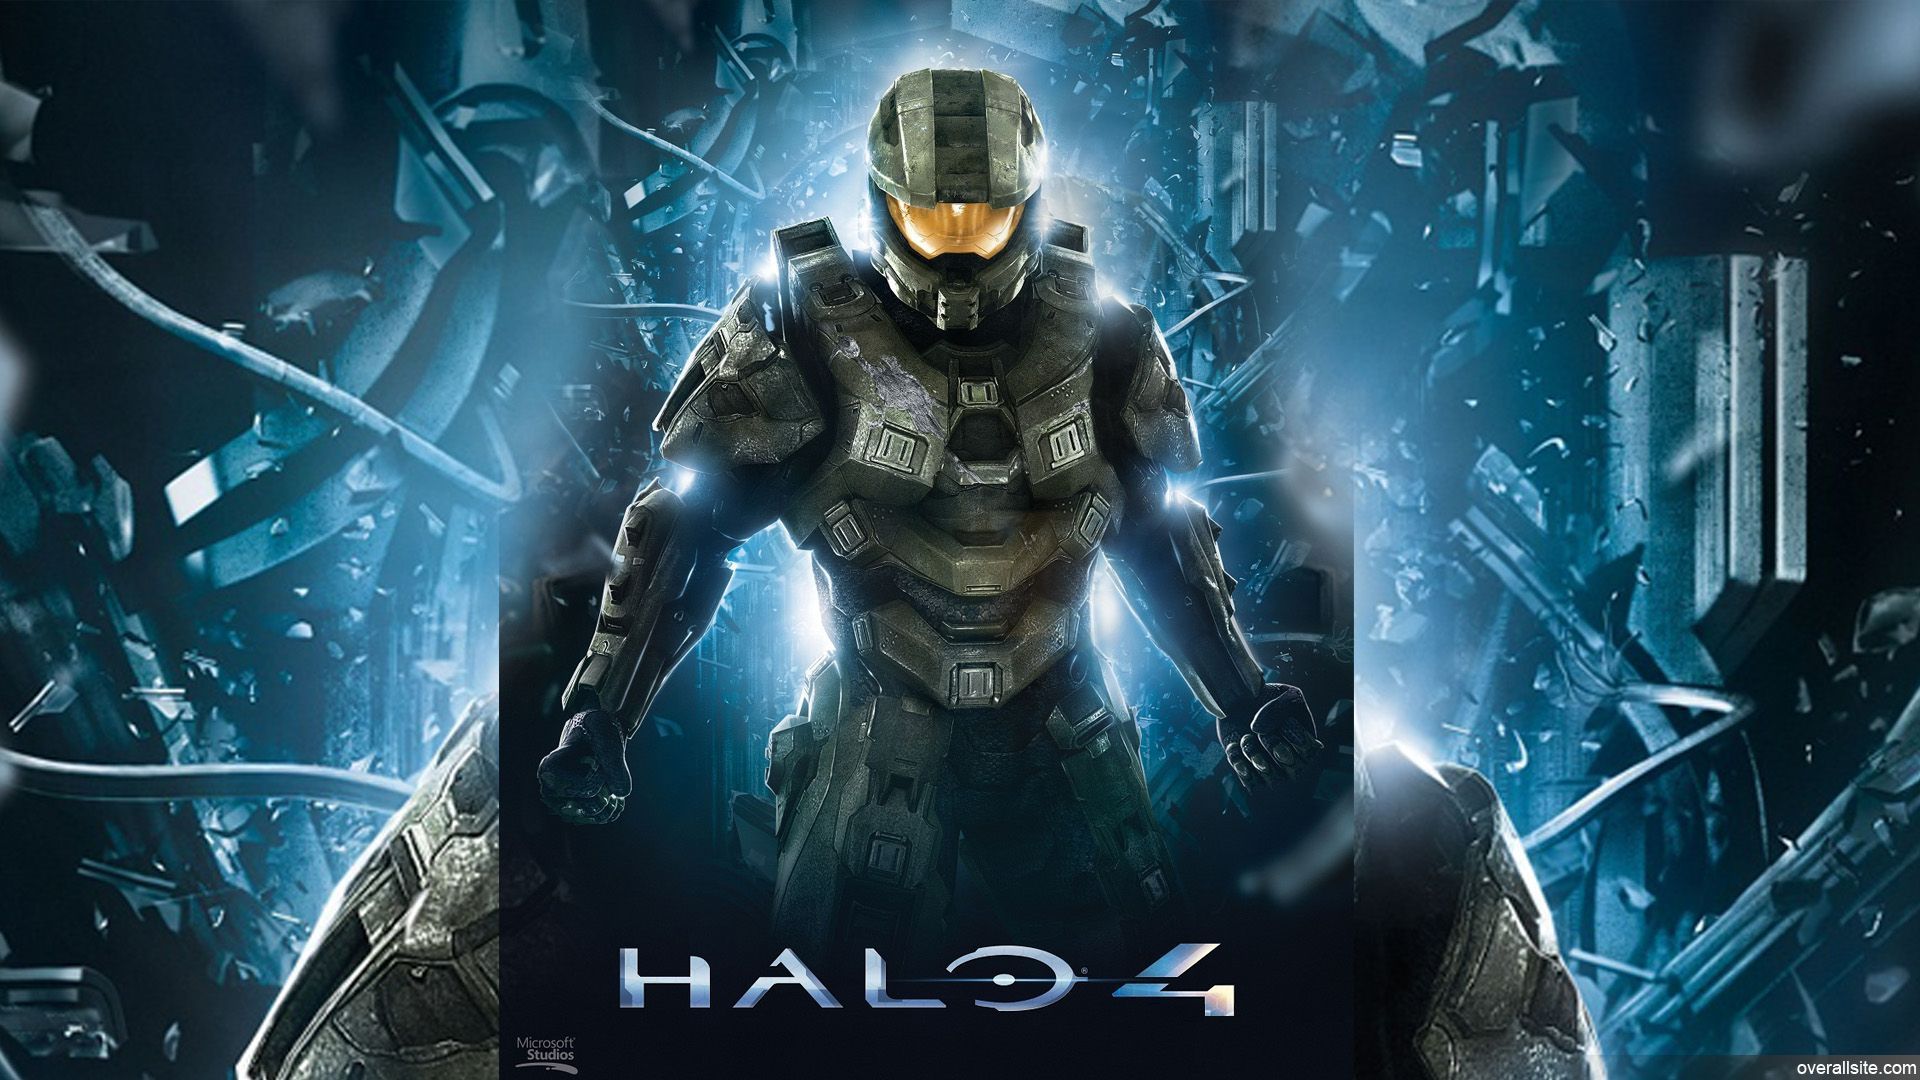 Halo 4 wallpapers